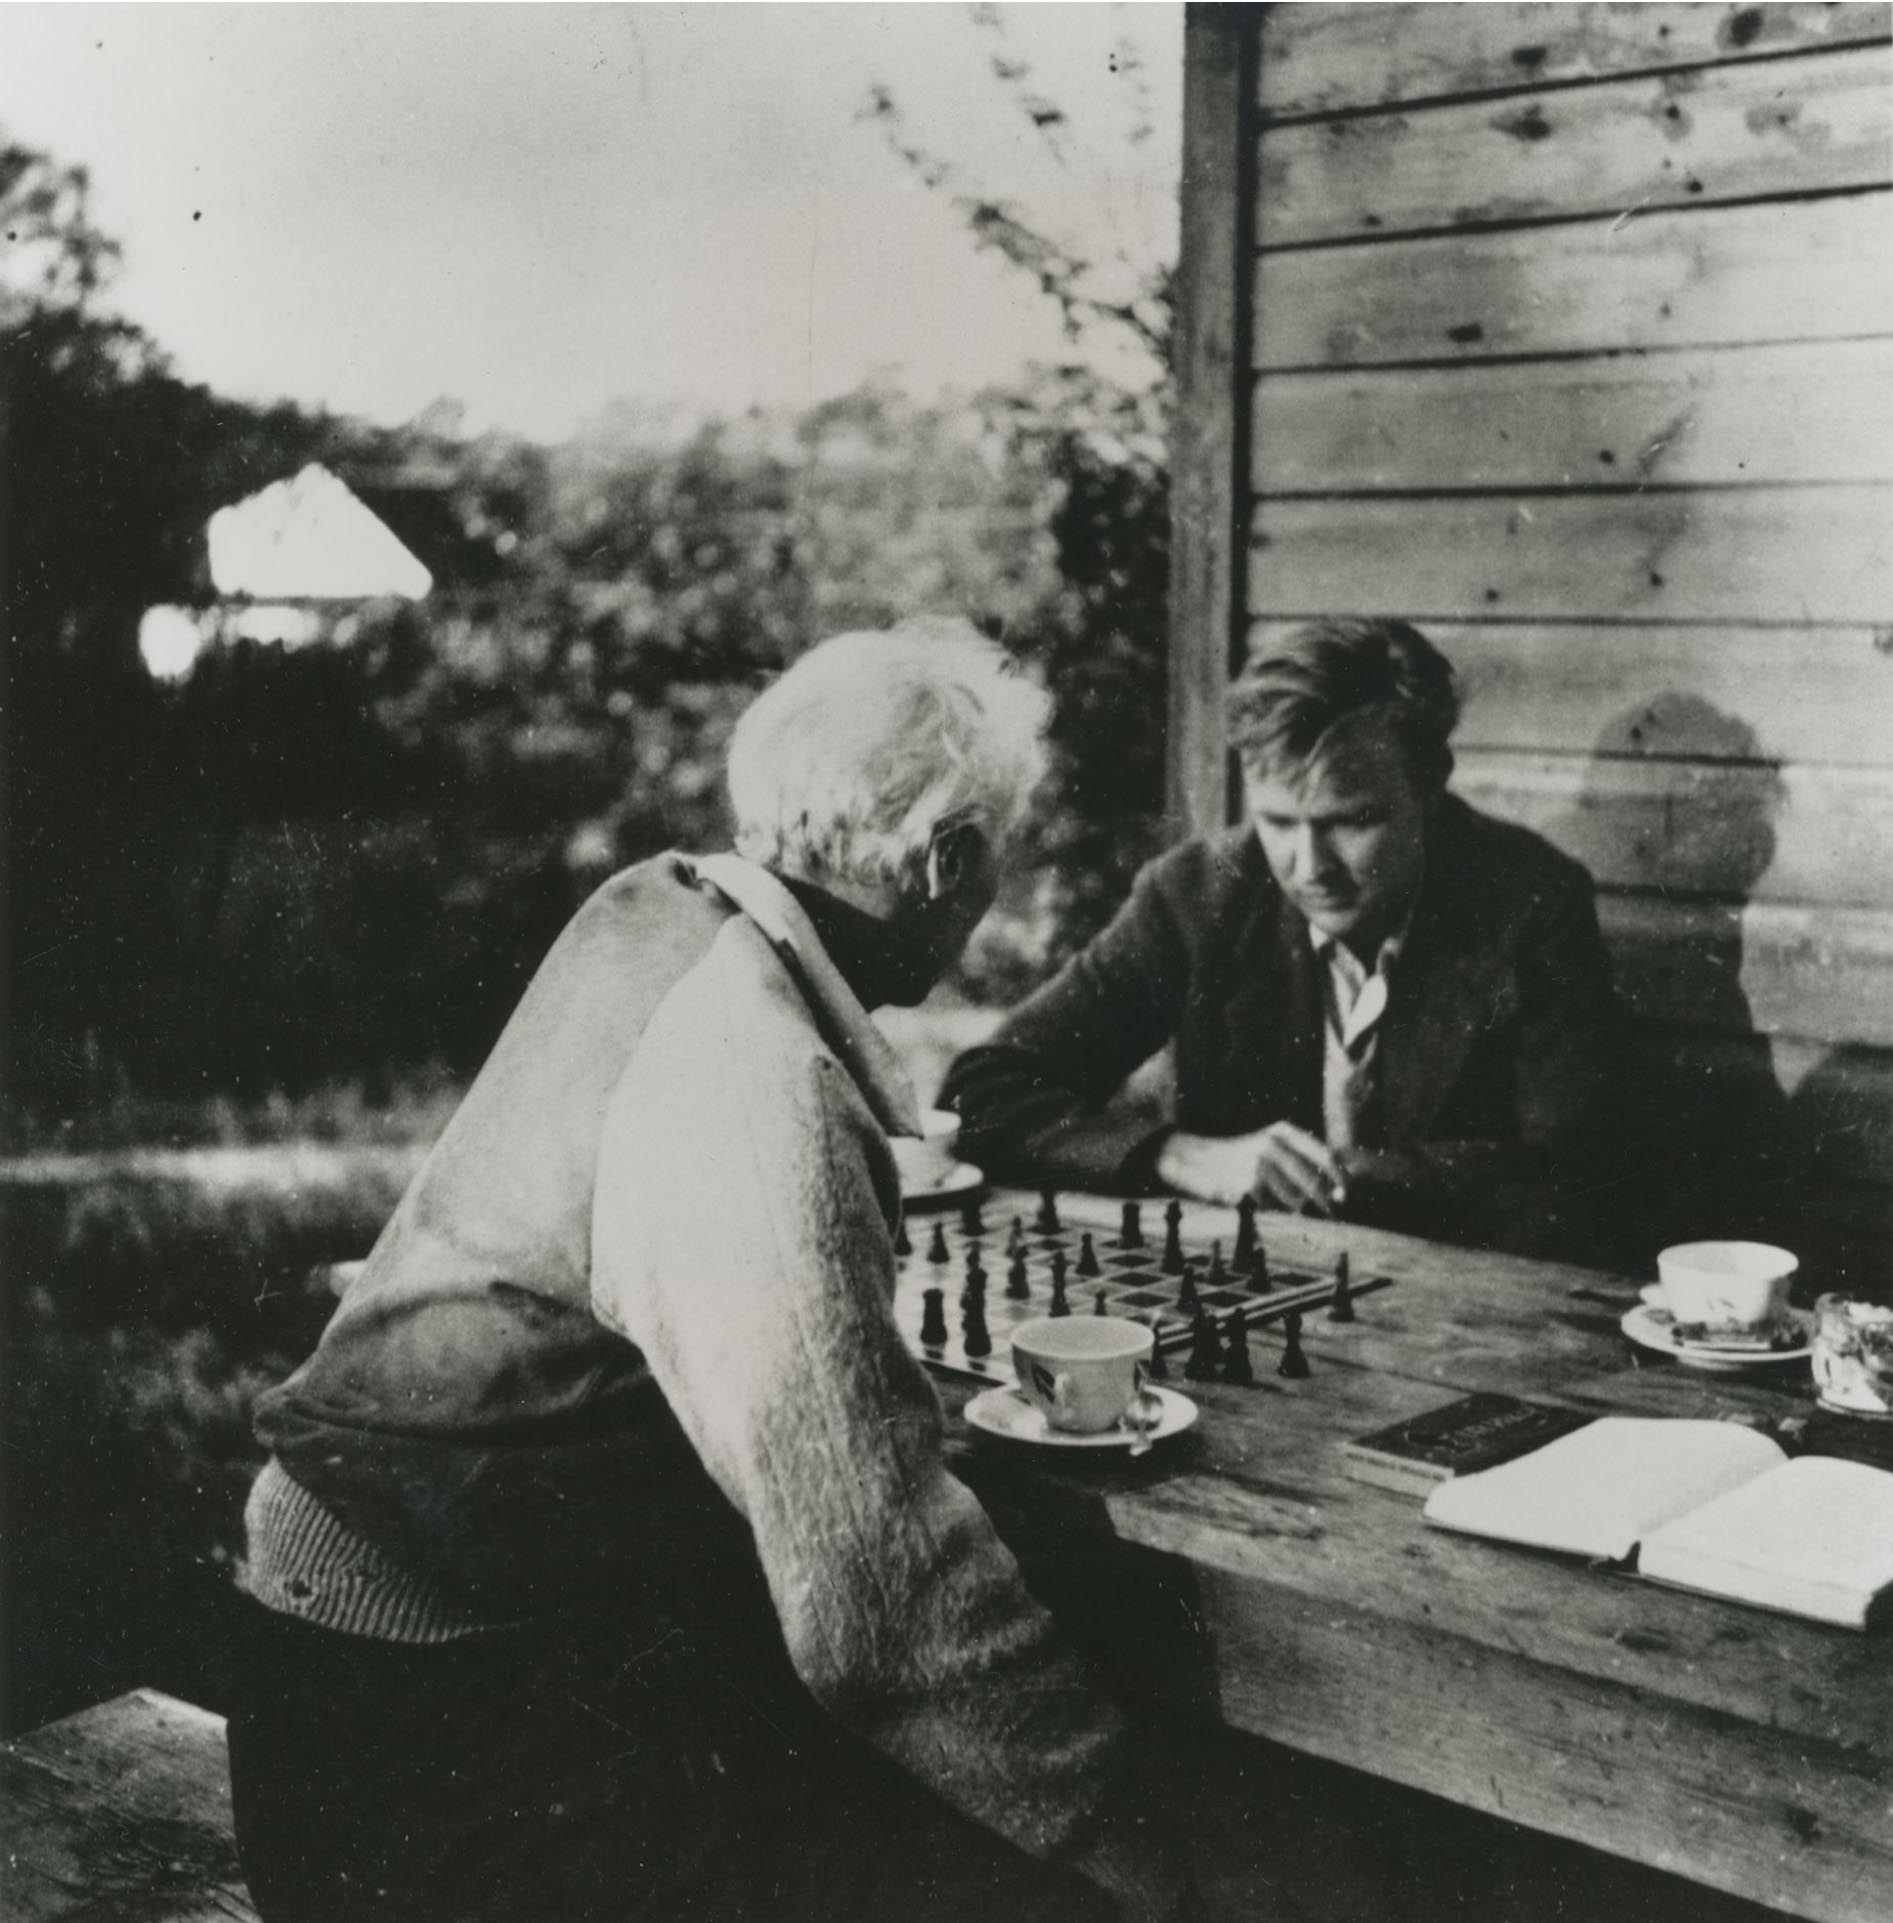 Robert Mothwerwell and Max Ernst playing chess at an outdoor table